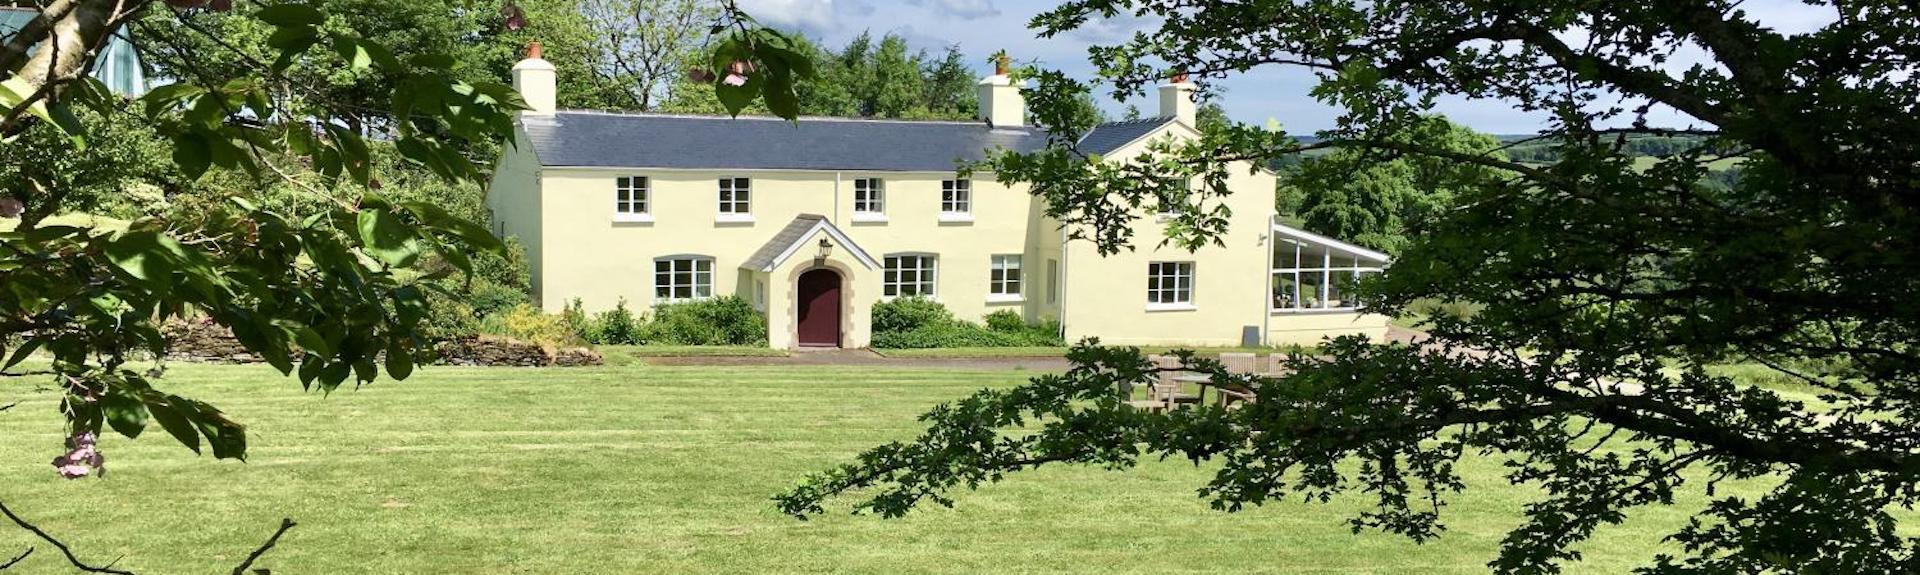 An Exmoor farmhouse overlooks a large lawn surrounded by trees.